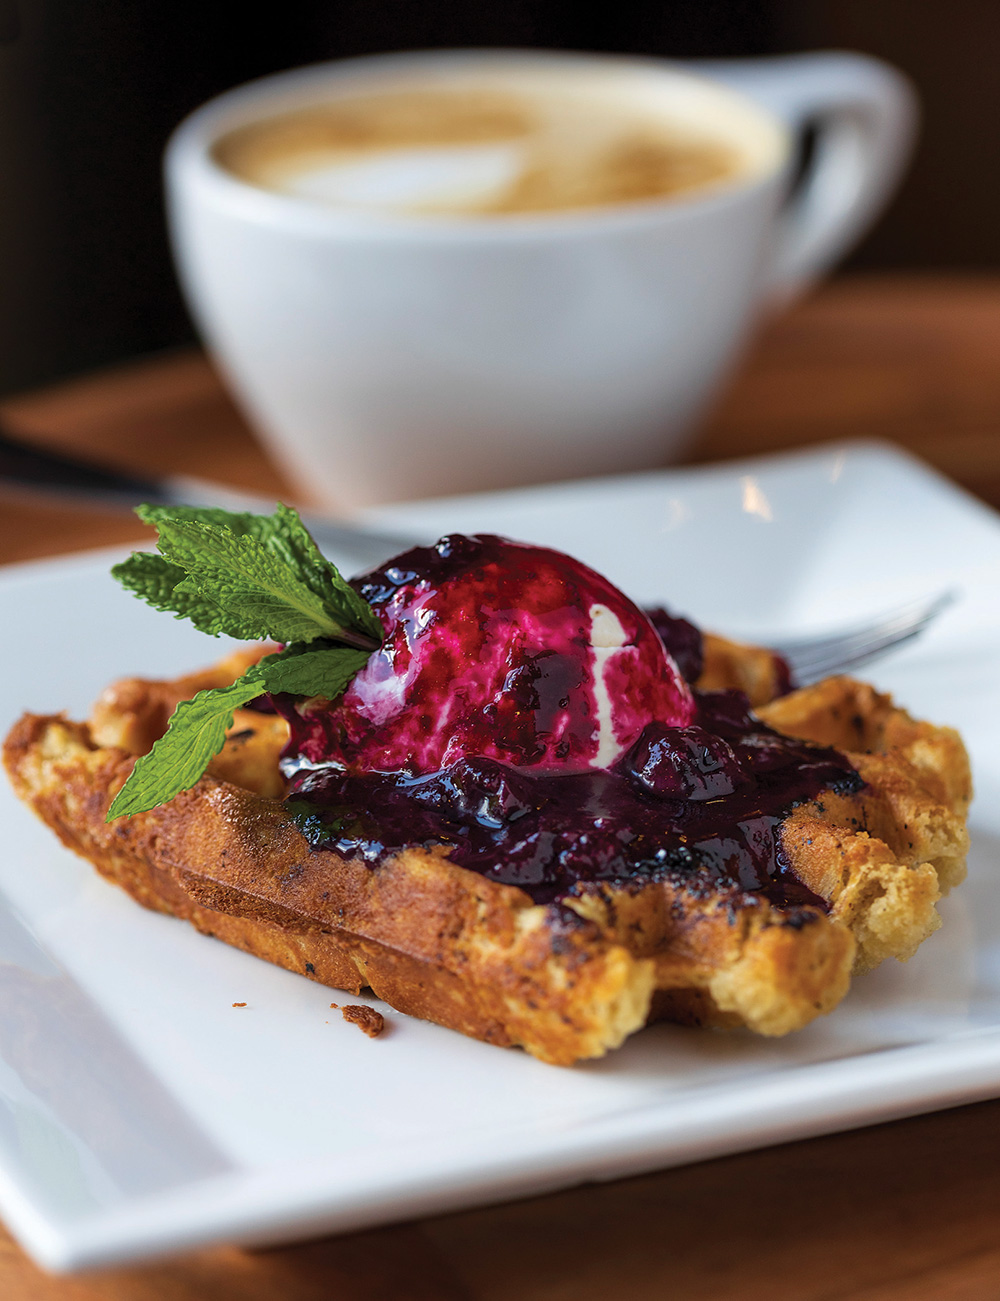 Everything served at Lovegrass Kitchen is gluten free, including liege waffles, crepes and granola, all made with cafe's signature ingredient, teff. Berry Delight waffle pictured here.